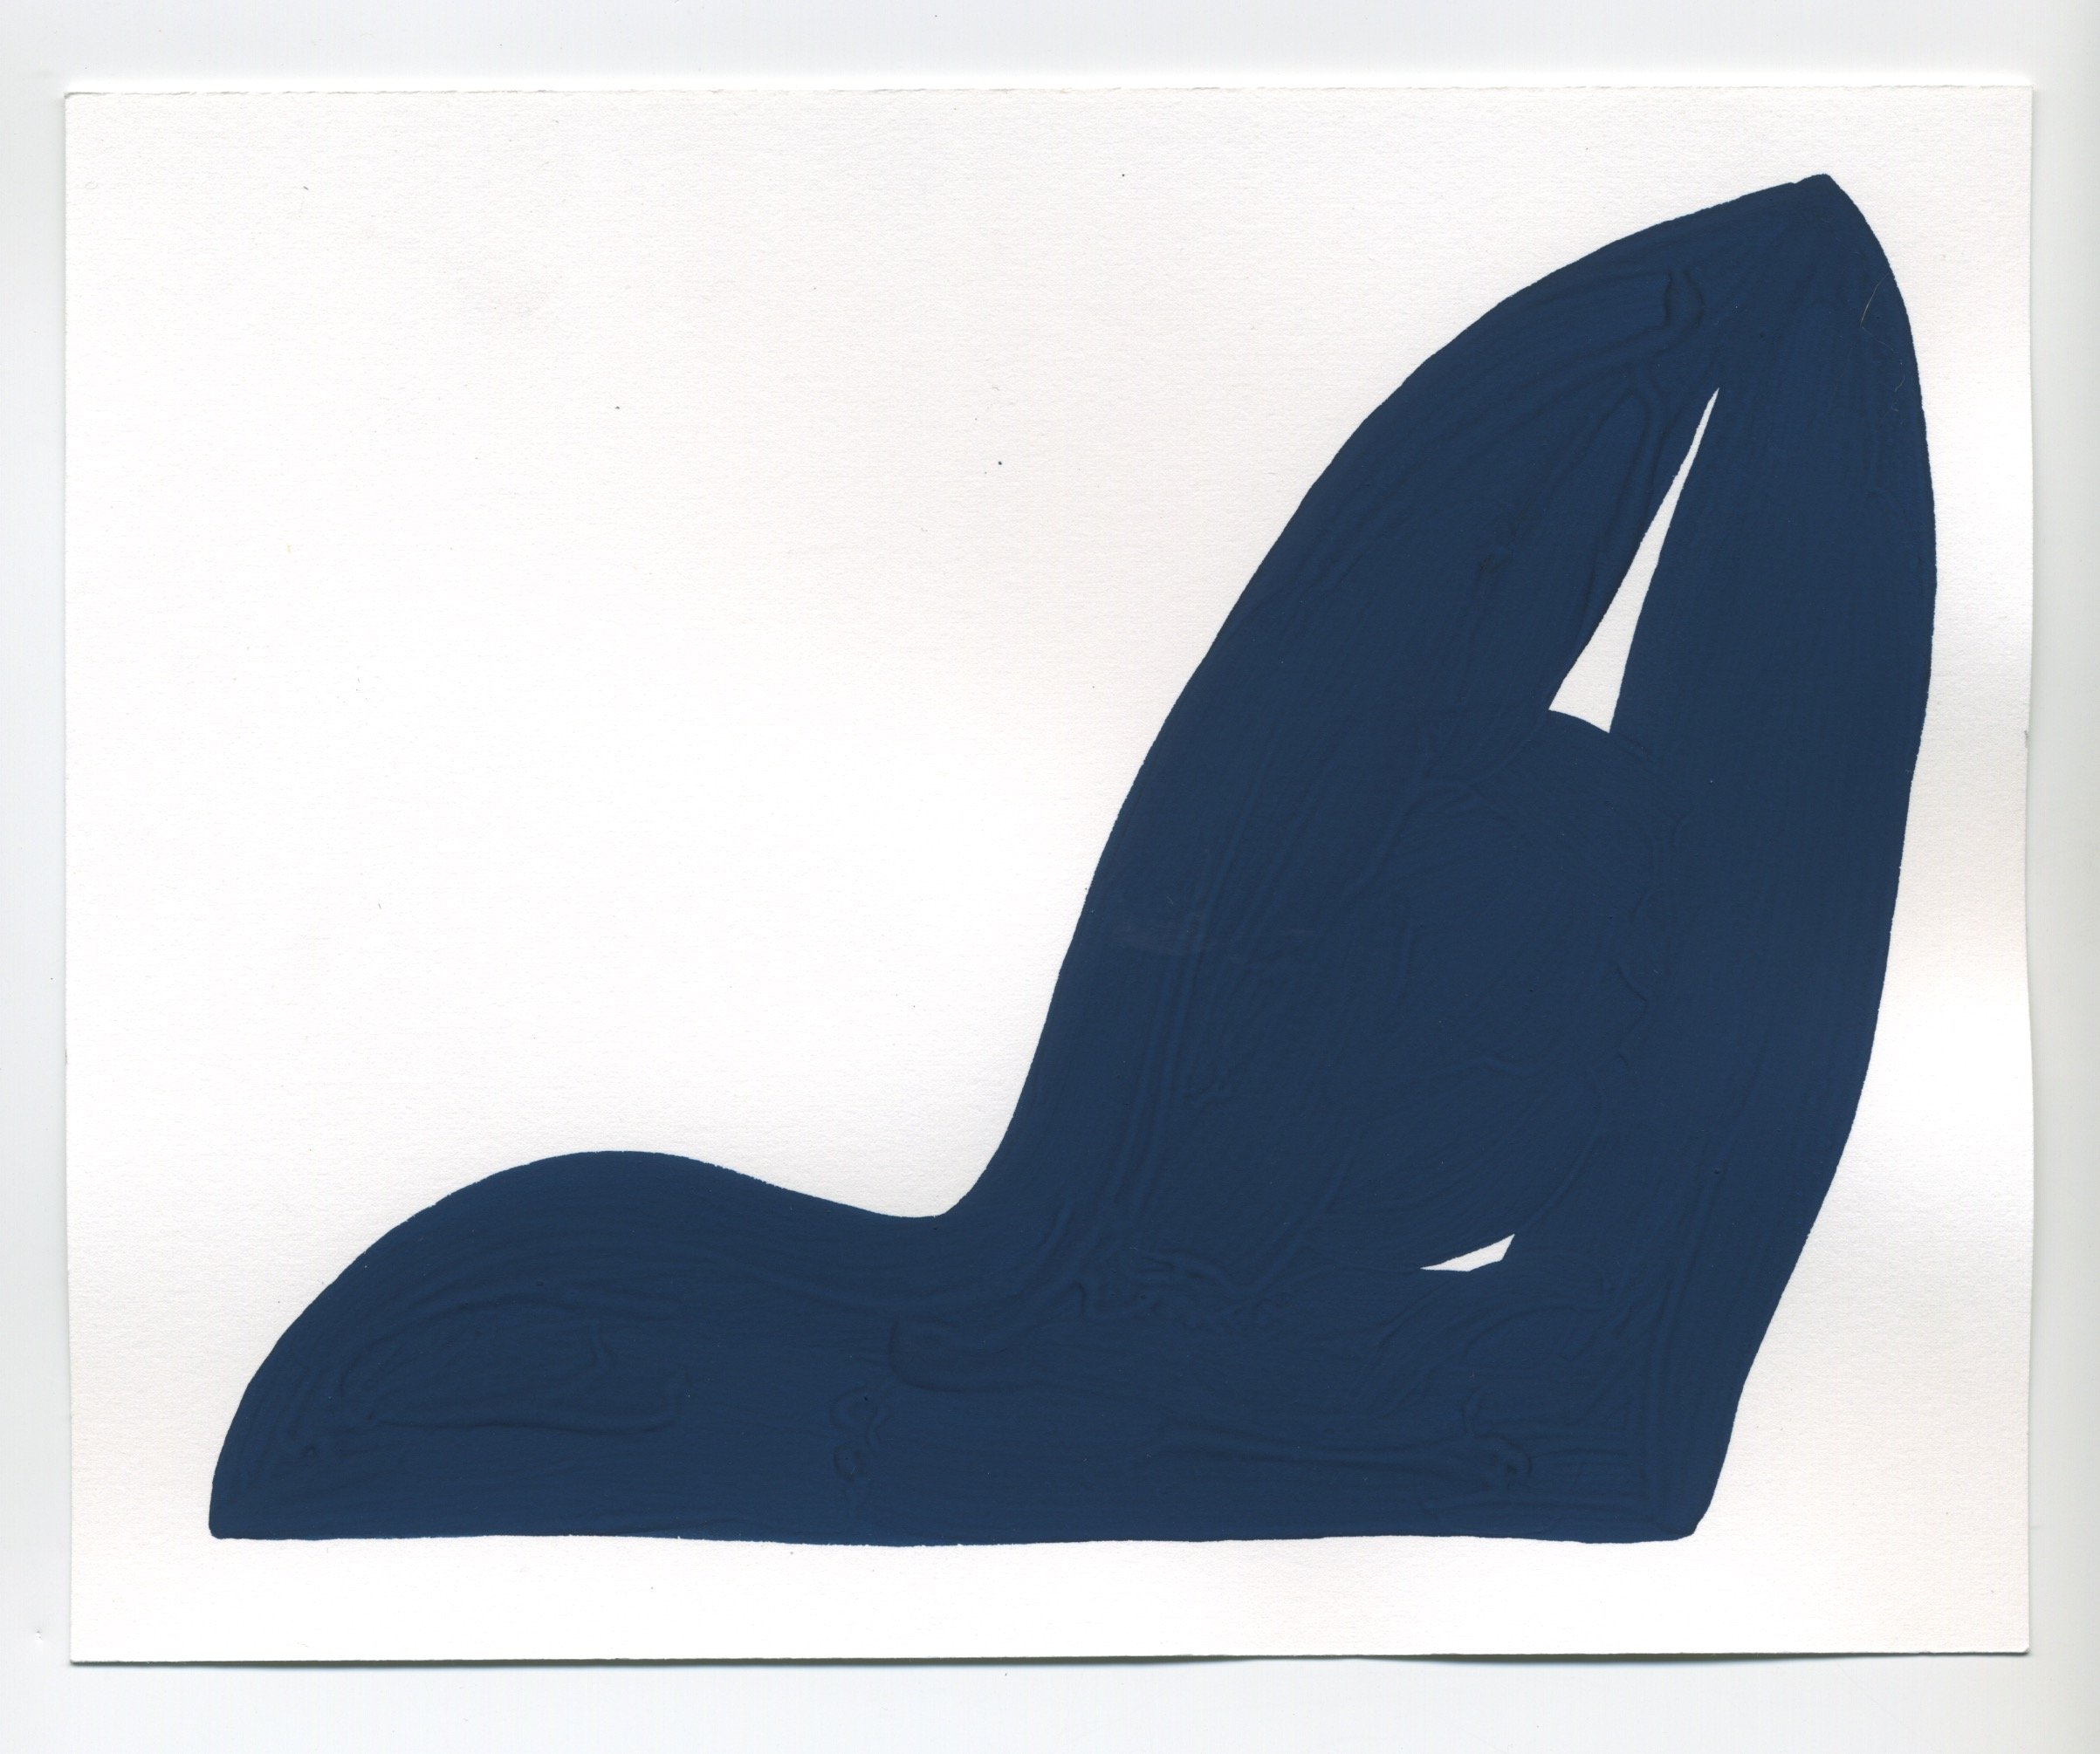   Elbow XVII   2022 gouache on paper 6 x 7.5 in  Private Collection   